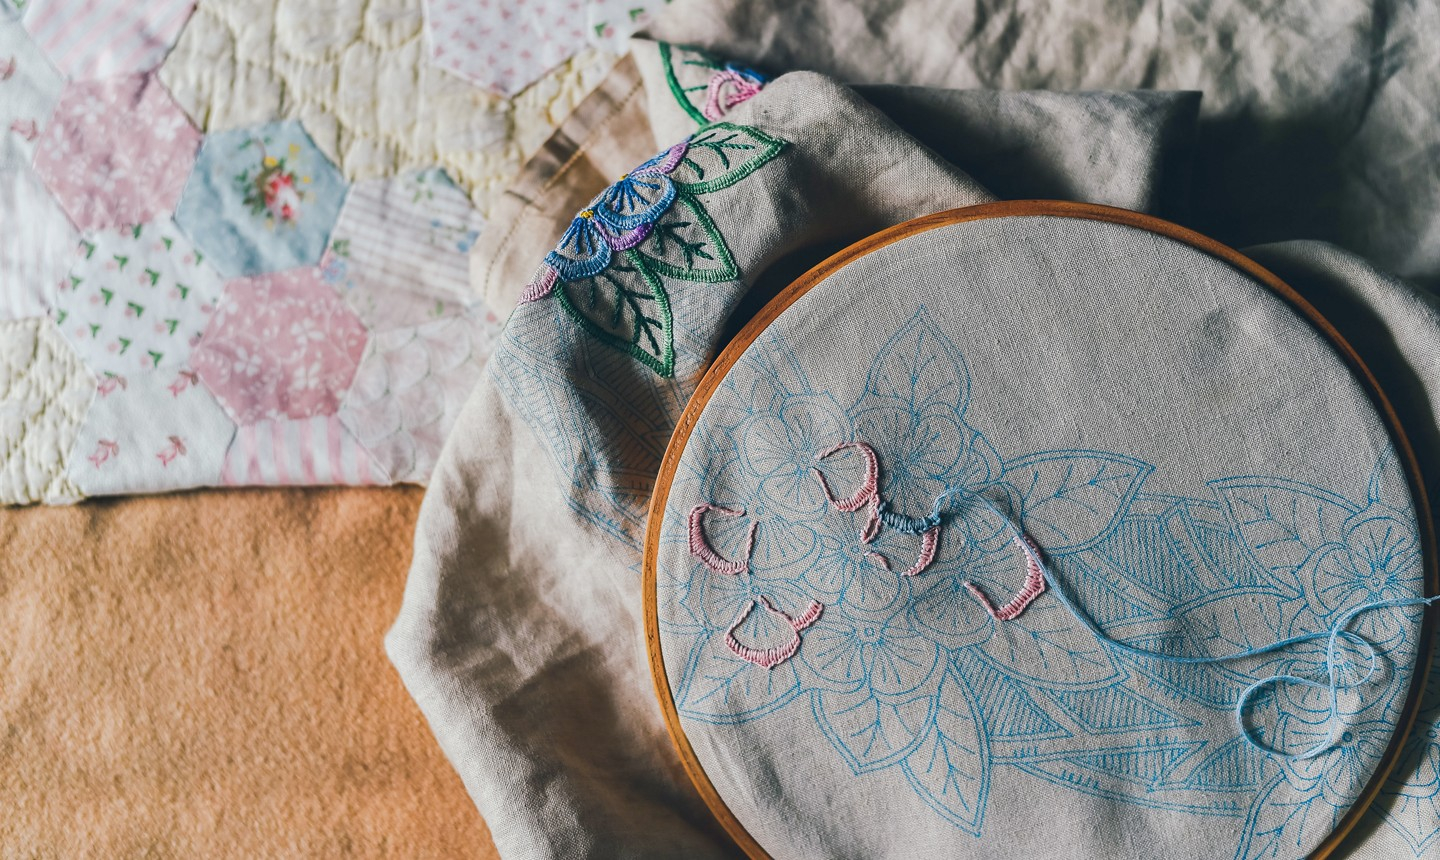 Free Hand Embroidery Patterns To Print 5 Simple Ways To Transfer Embroidery Designs